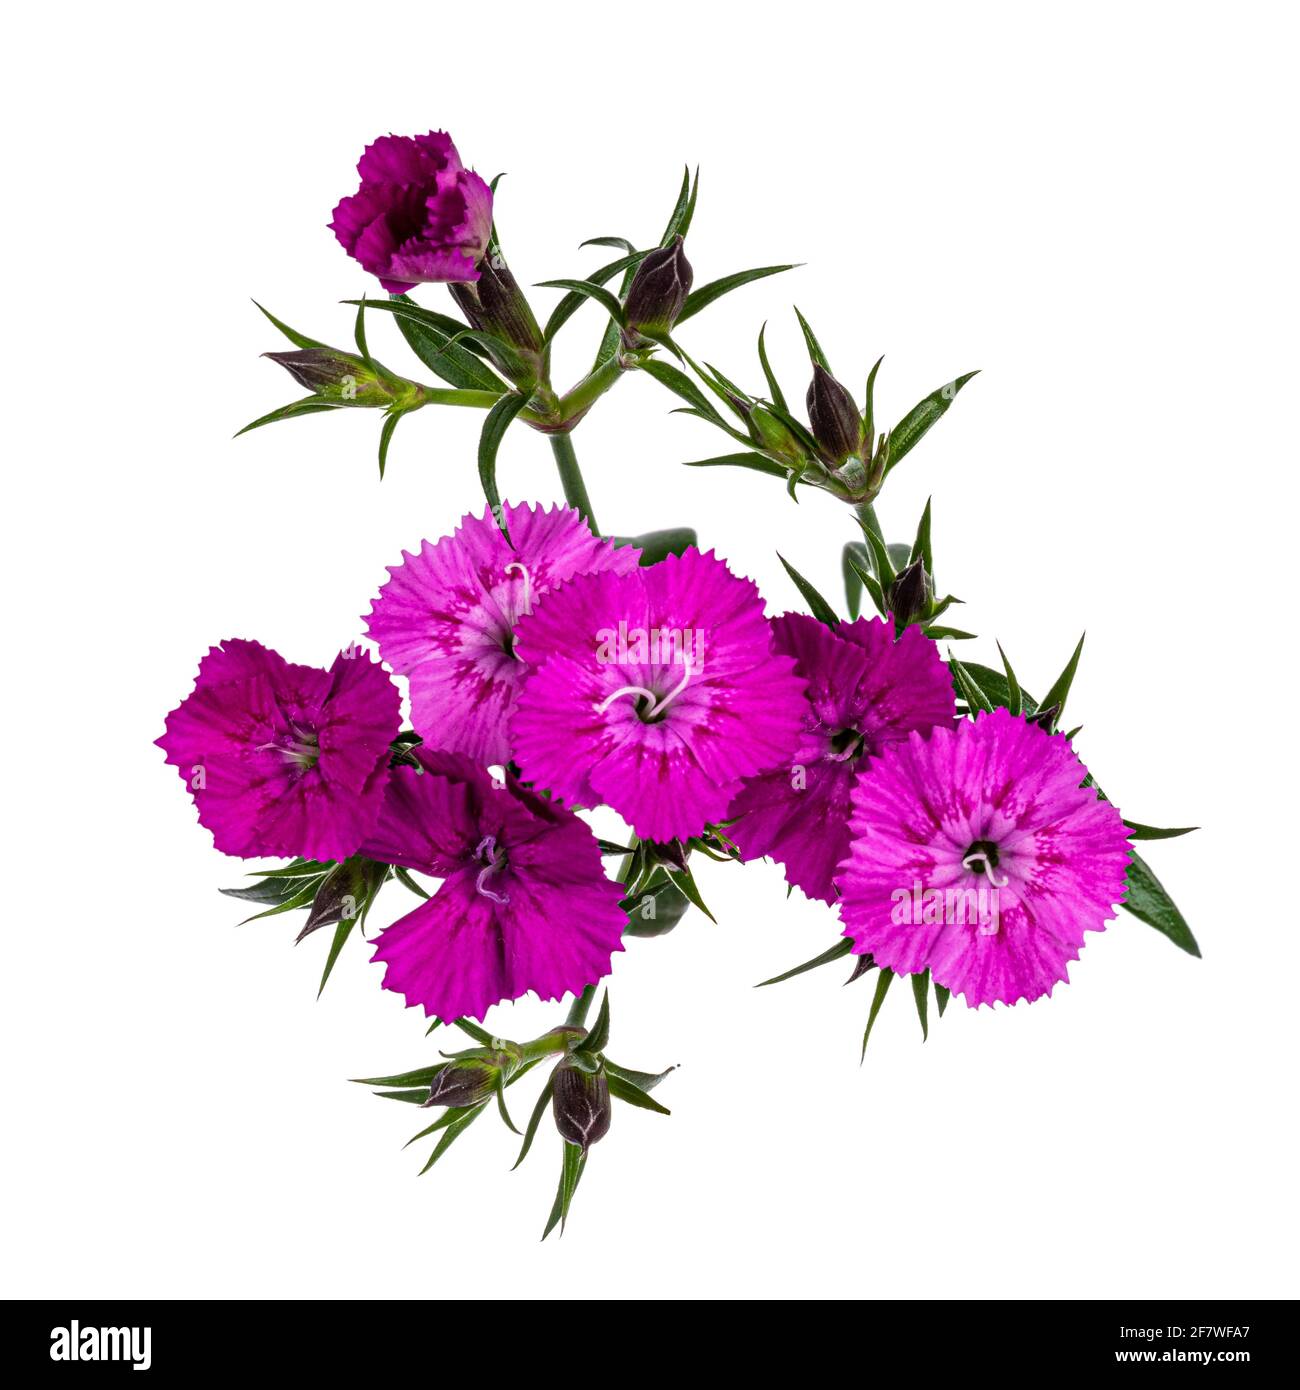 Branch with multiple pink Dianthus aka carnation flowers. Top view on white background. Stock Photo